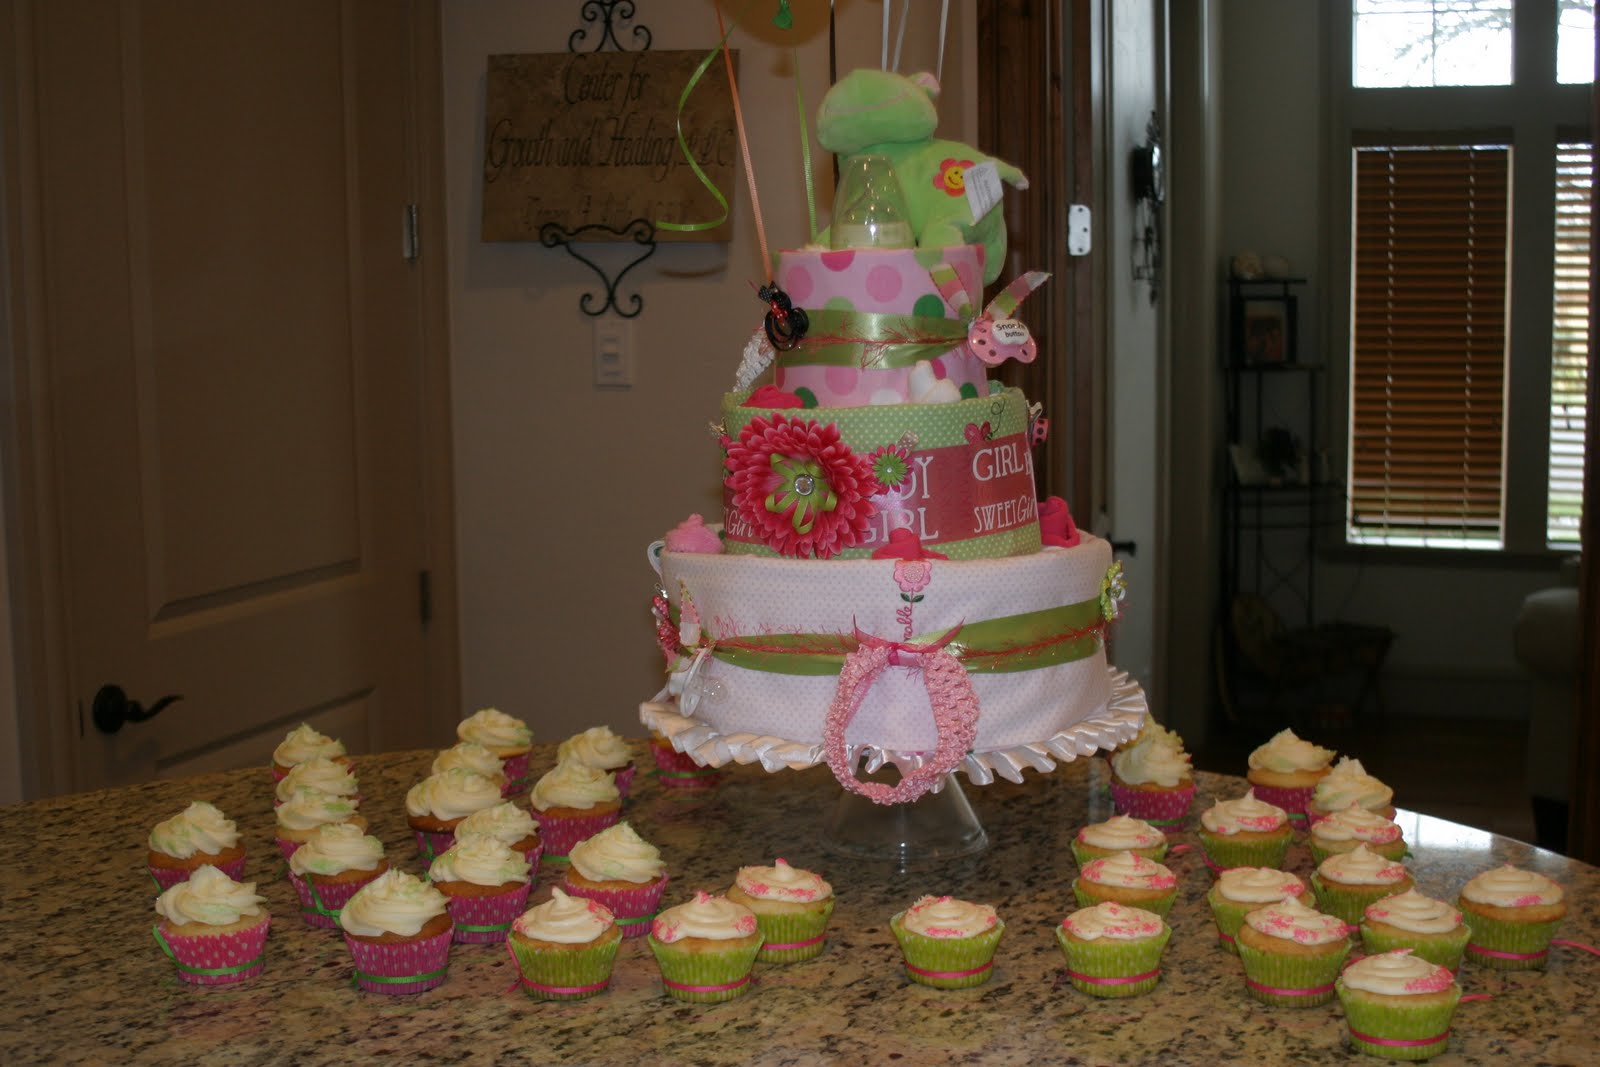 Hot Pink and Lime Green Baby Shower Cake